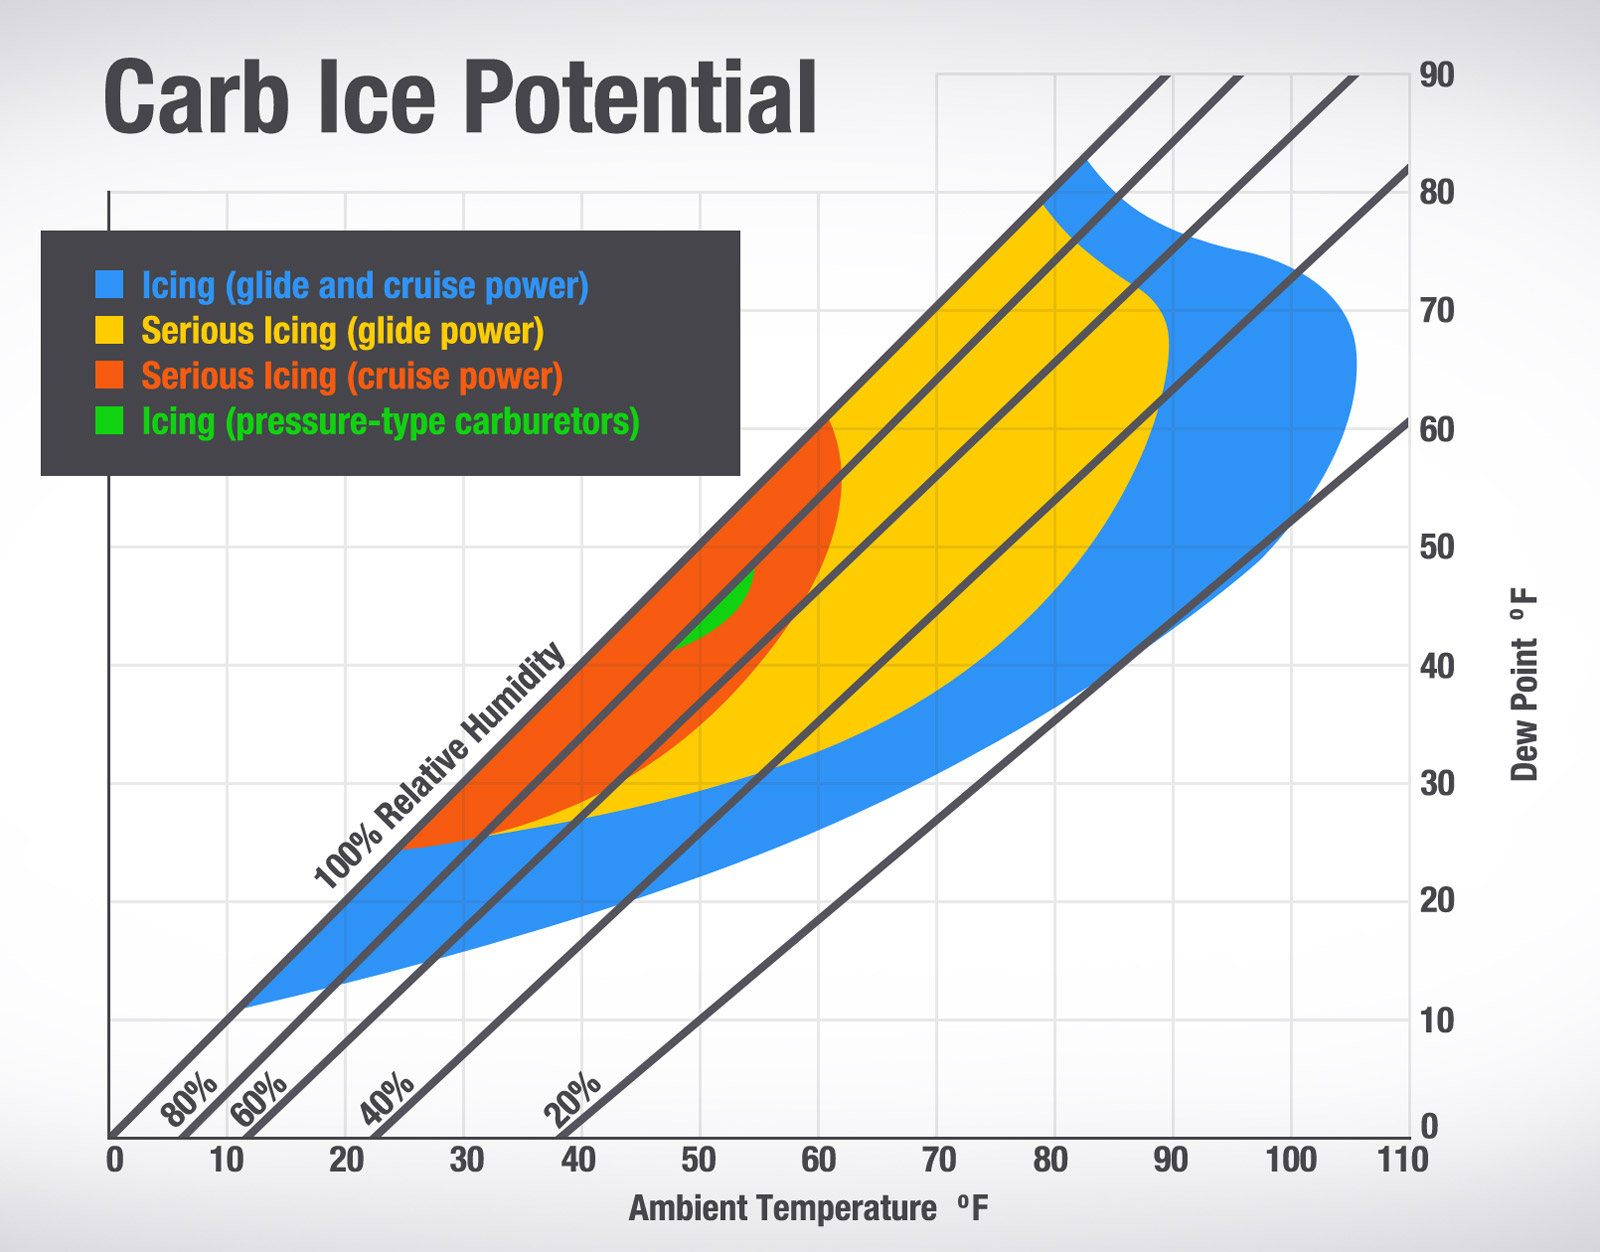 http://www.boldmethod.com/images/pages/learn-to-fly/systems/carb-ice/carb-ice-potential-chart.jpg